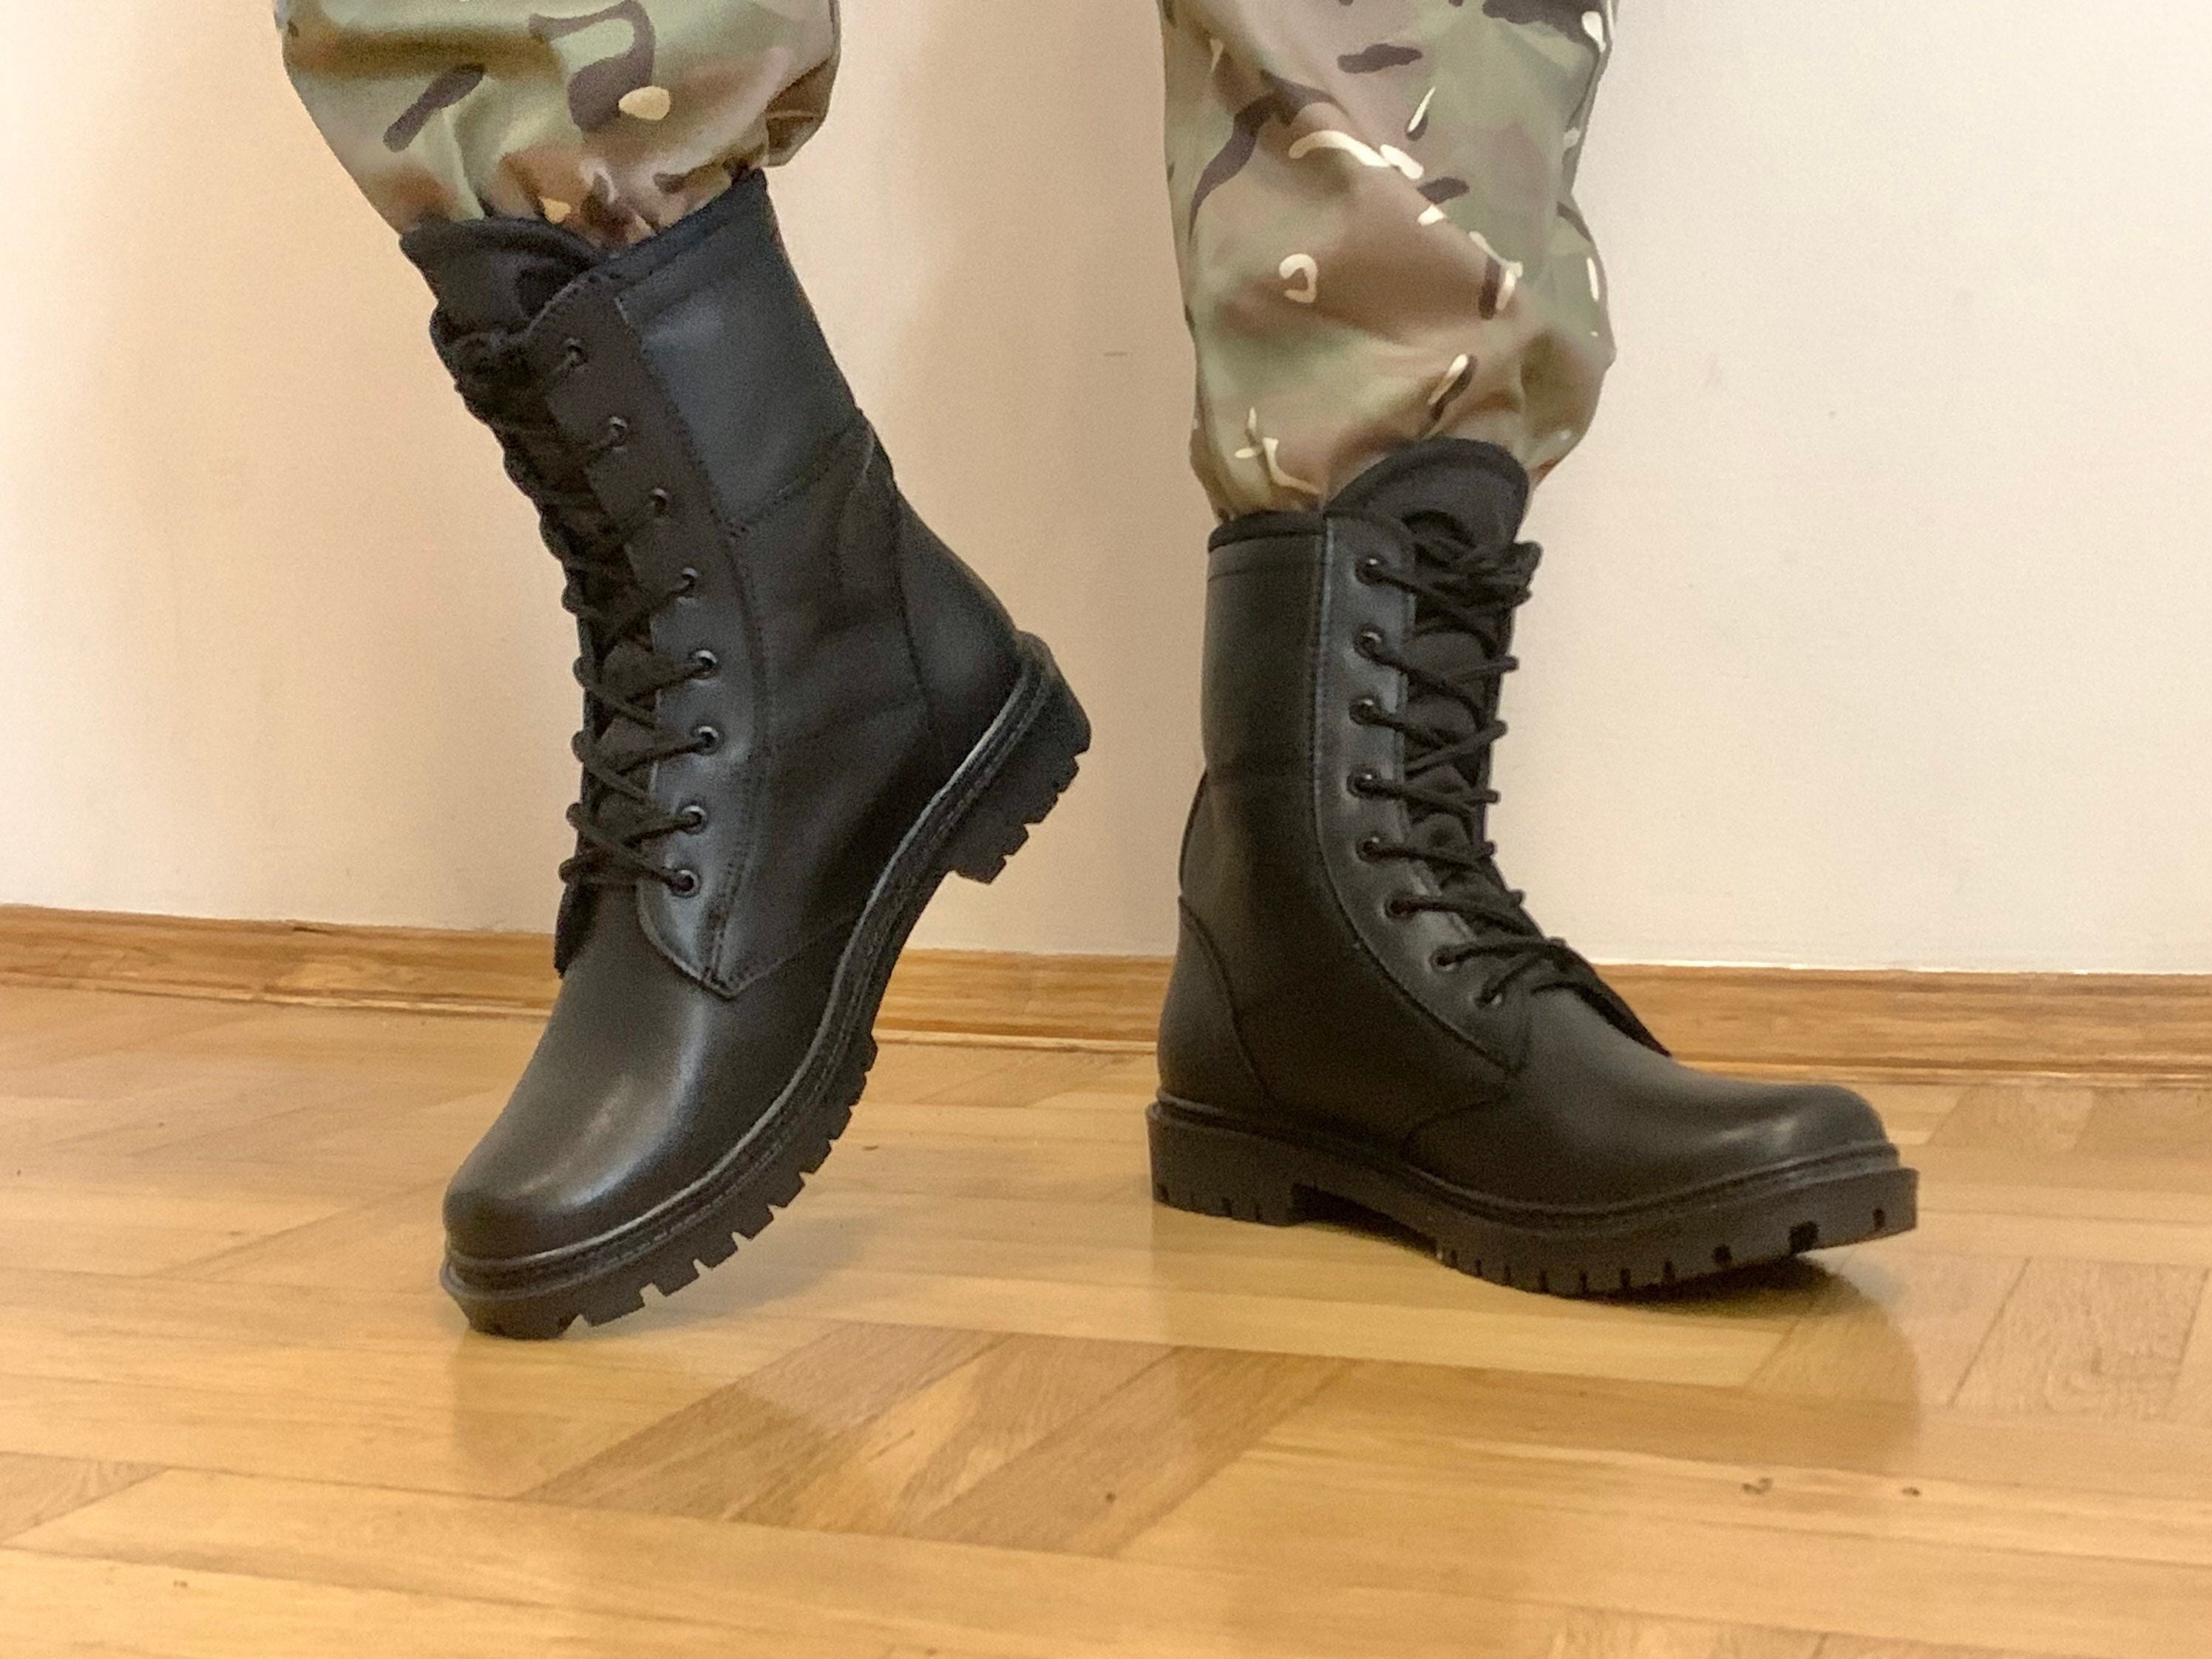 Vintage Military Boots MENS SIZE 10 Black Leather Army STEEL Toe Combat  Boots - ShopperBoard